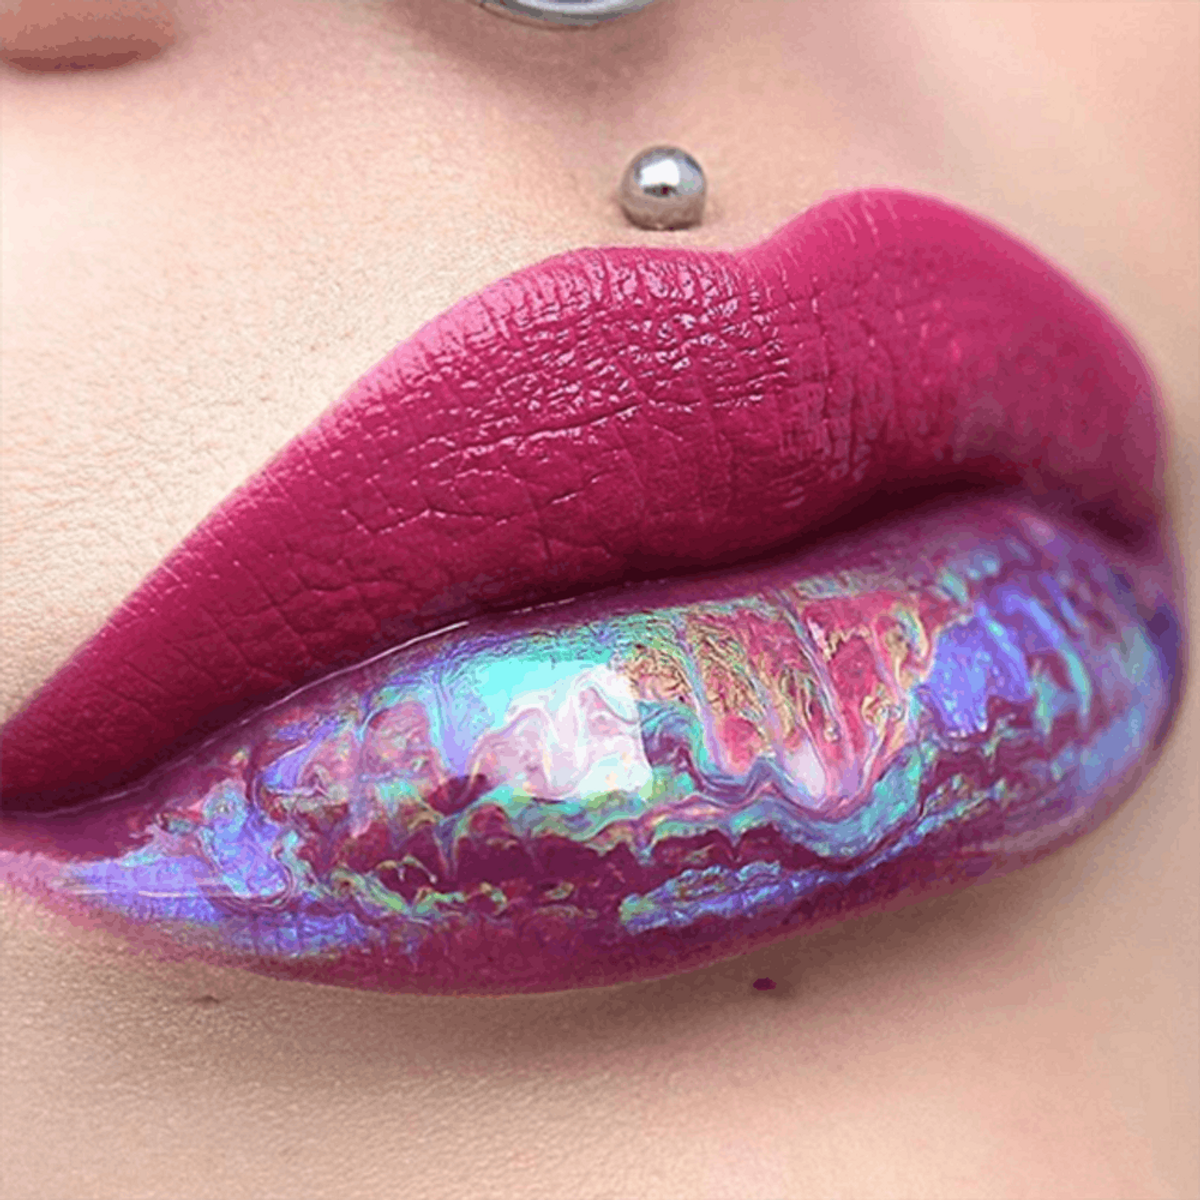 This Holographic Lip Trend Is Futuristic AF